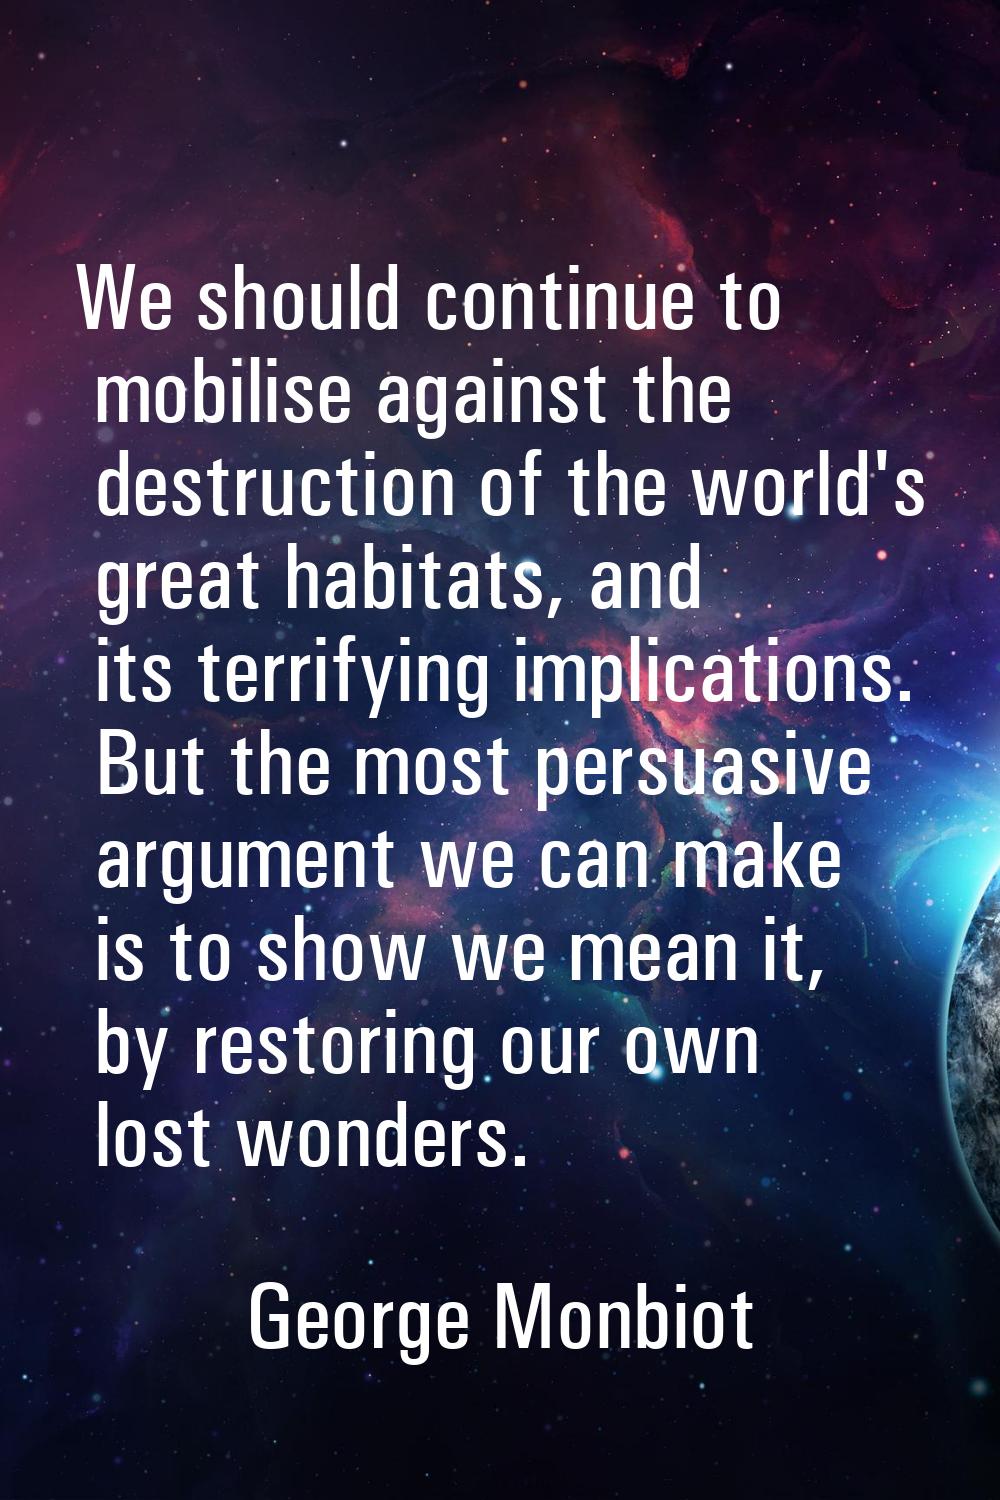 We should continue to mobilise against the destruction of the world's great habitats, and its terri